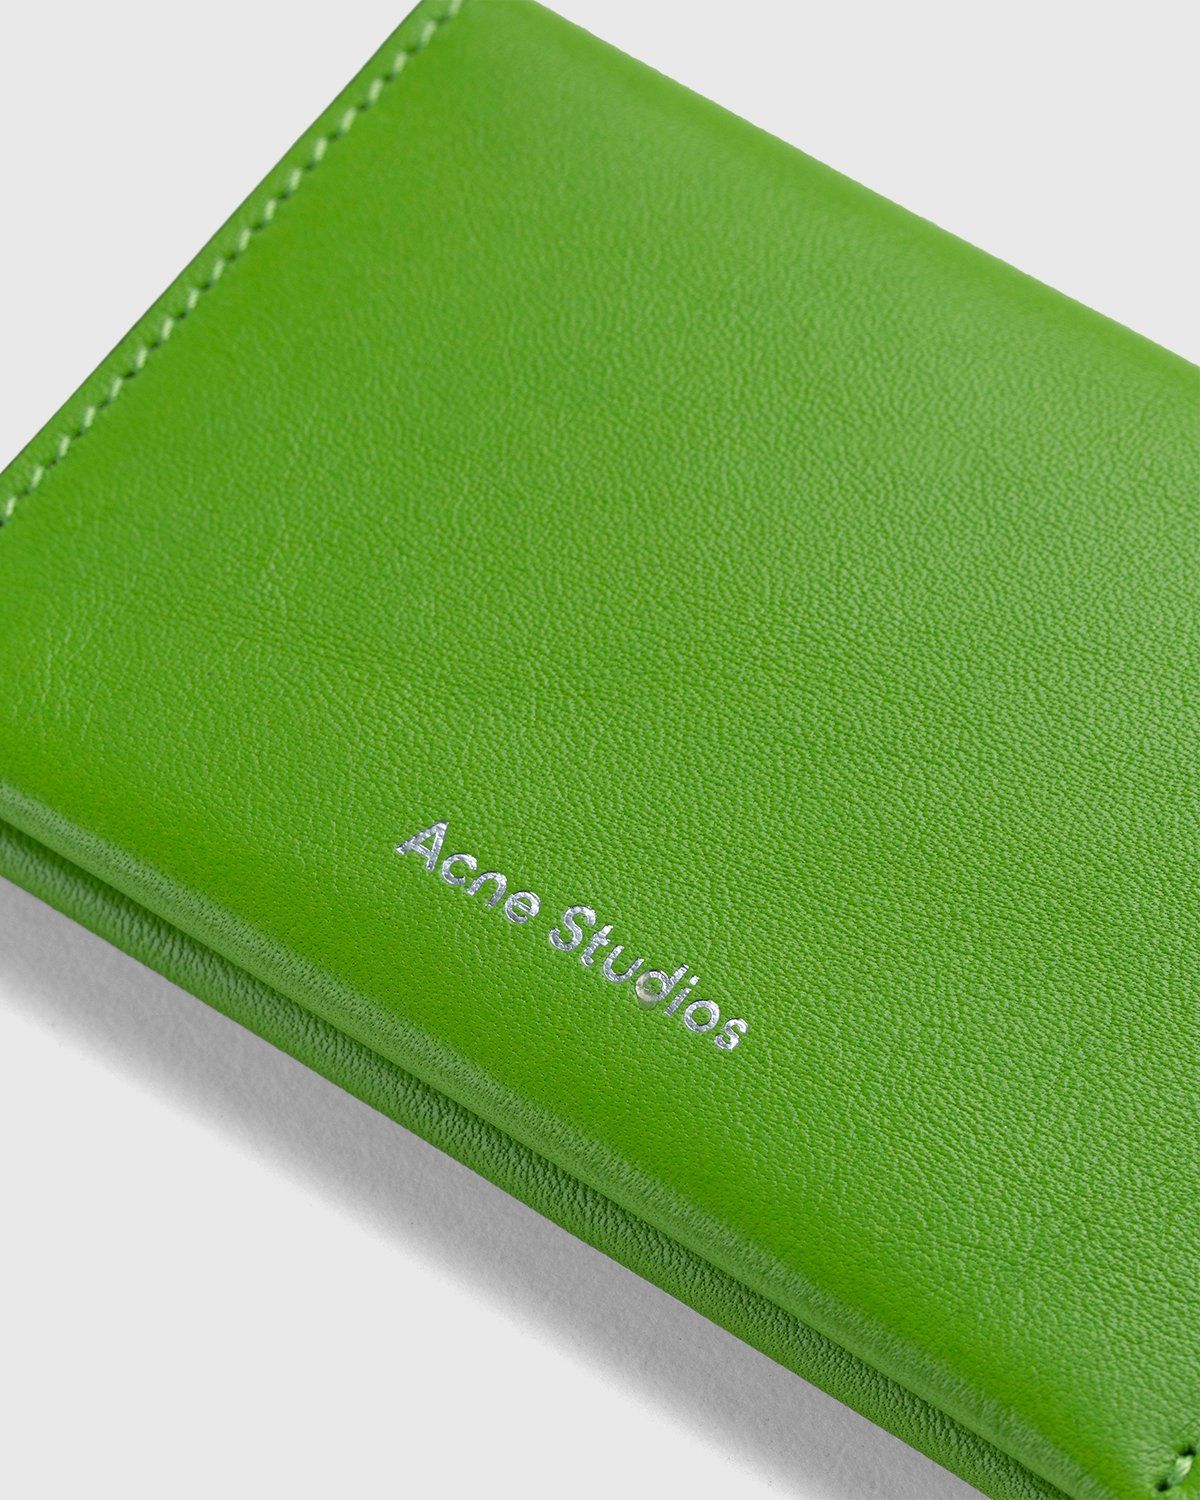 Acne Studios – Leather Card Case Multi Green - Wallets - Green - Image 3